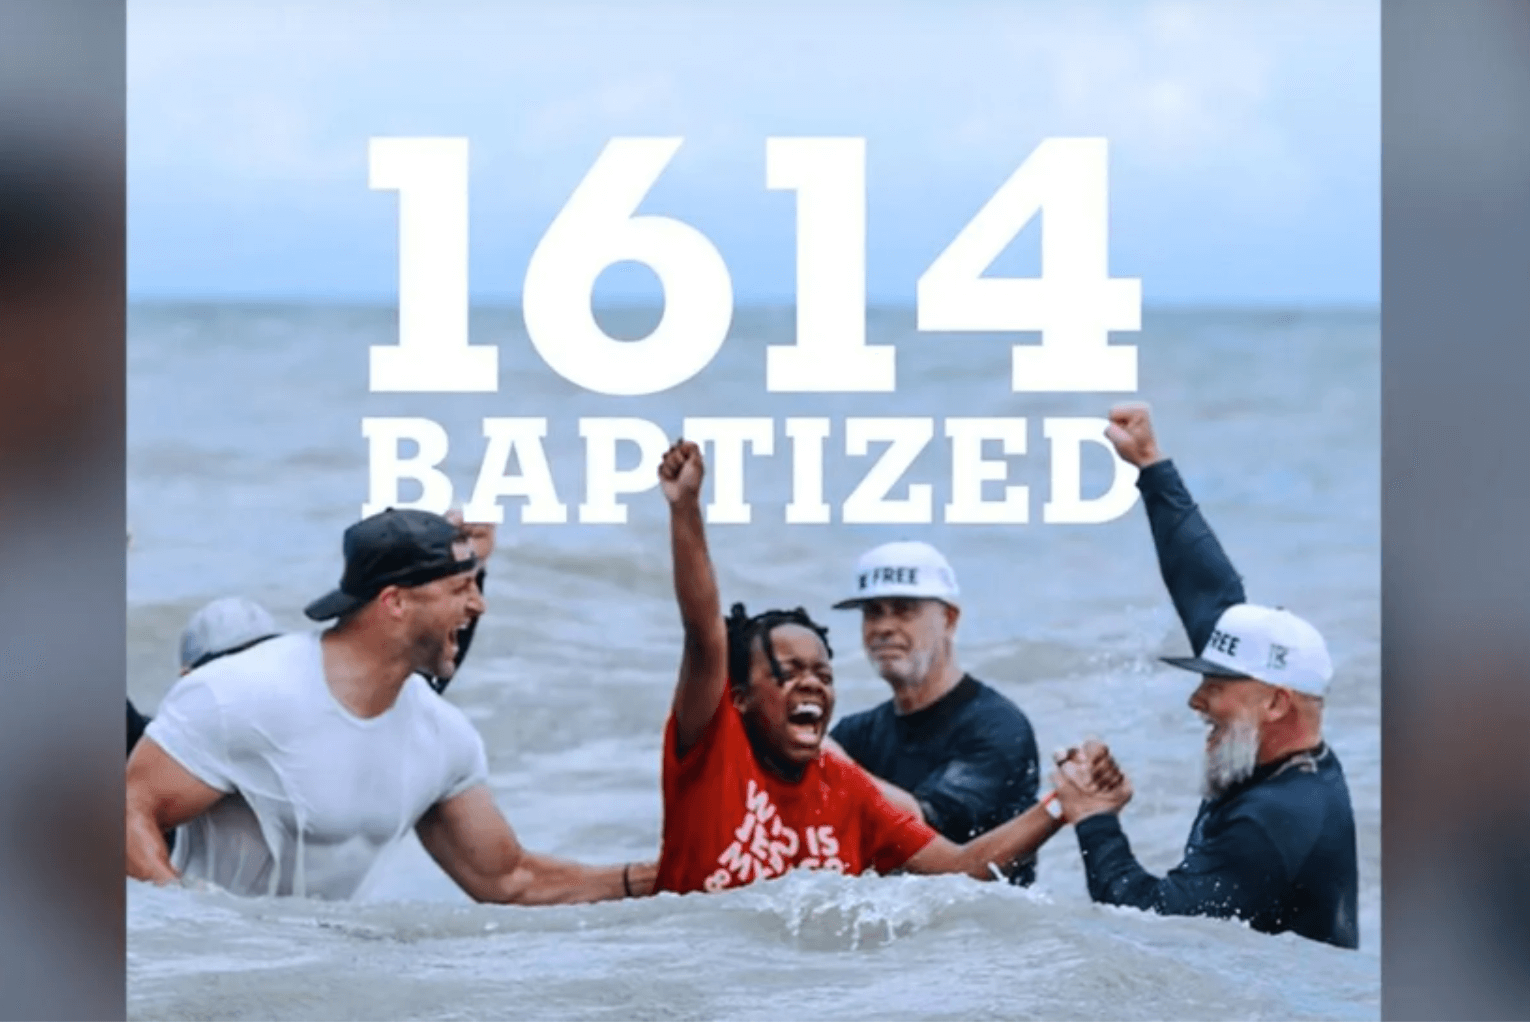 ANOTHER Mega Baptism: Church Dunks 1600+ New Believers on Beach